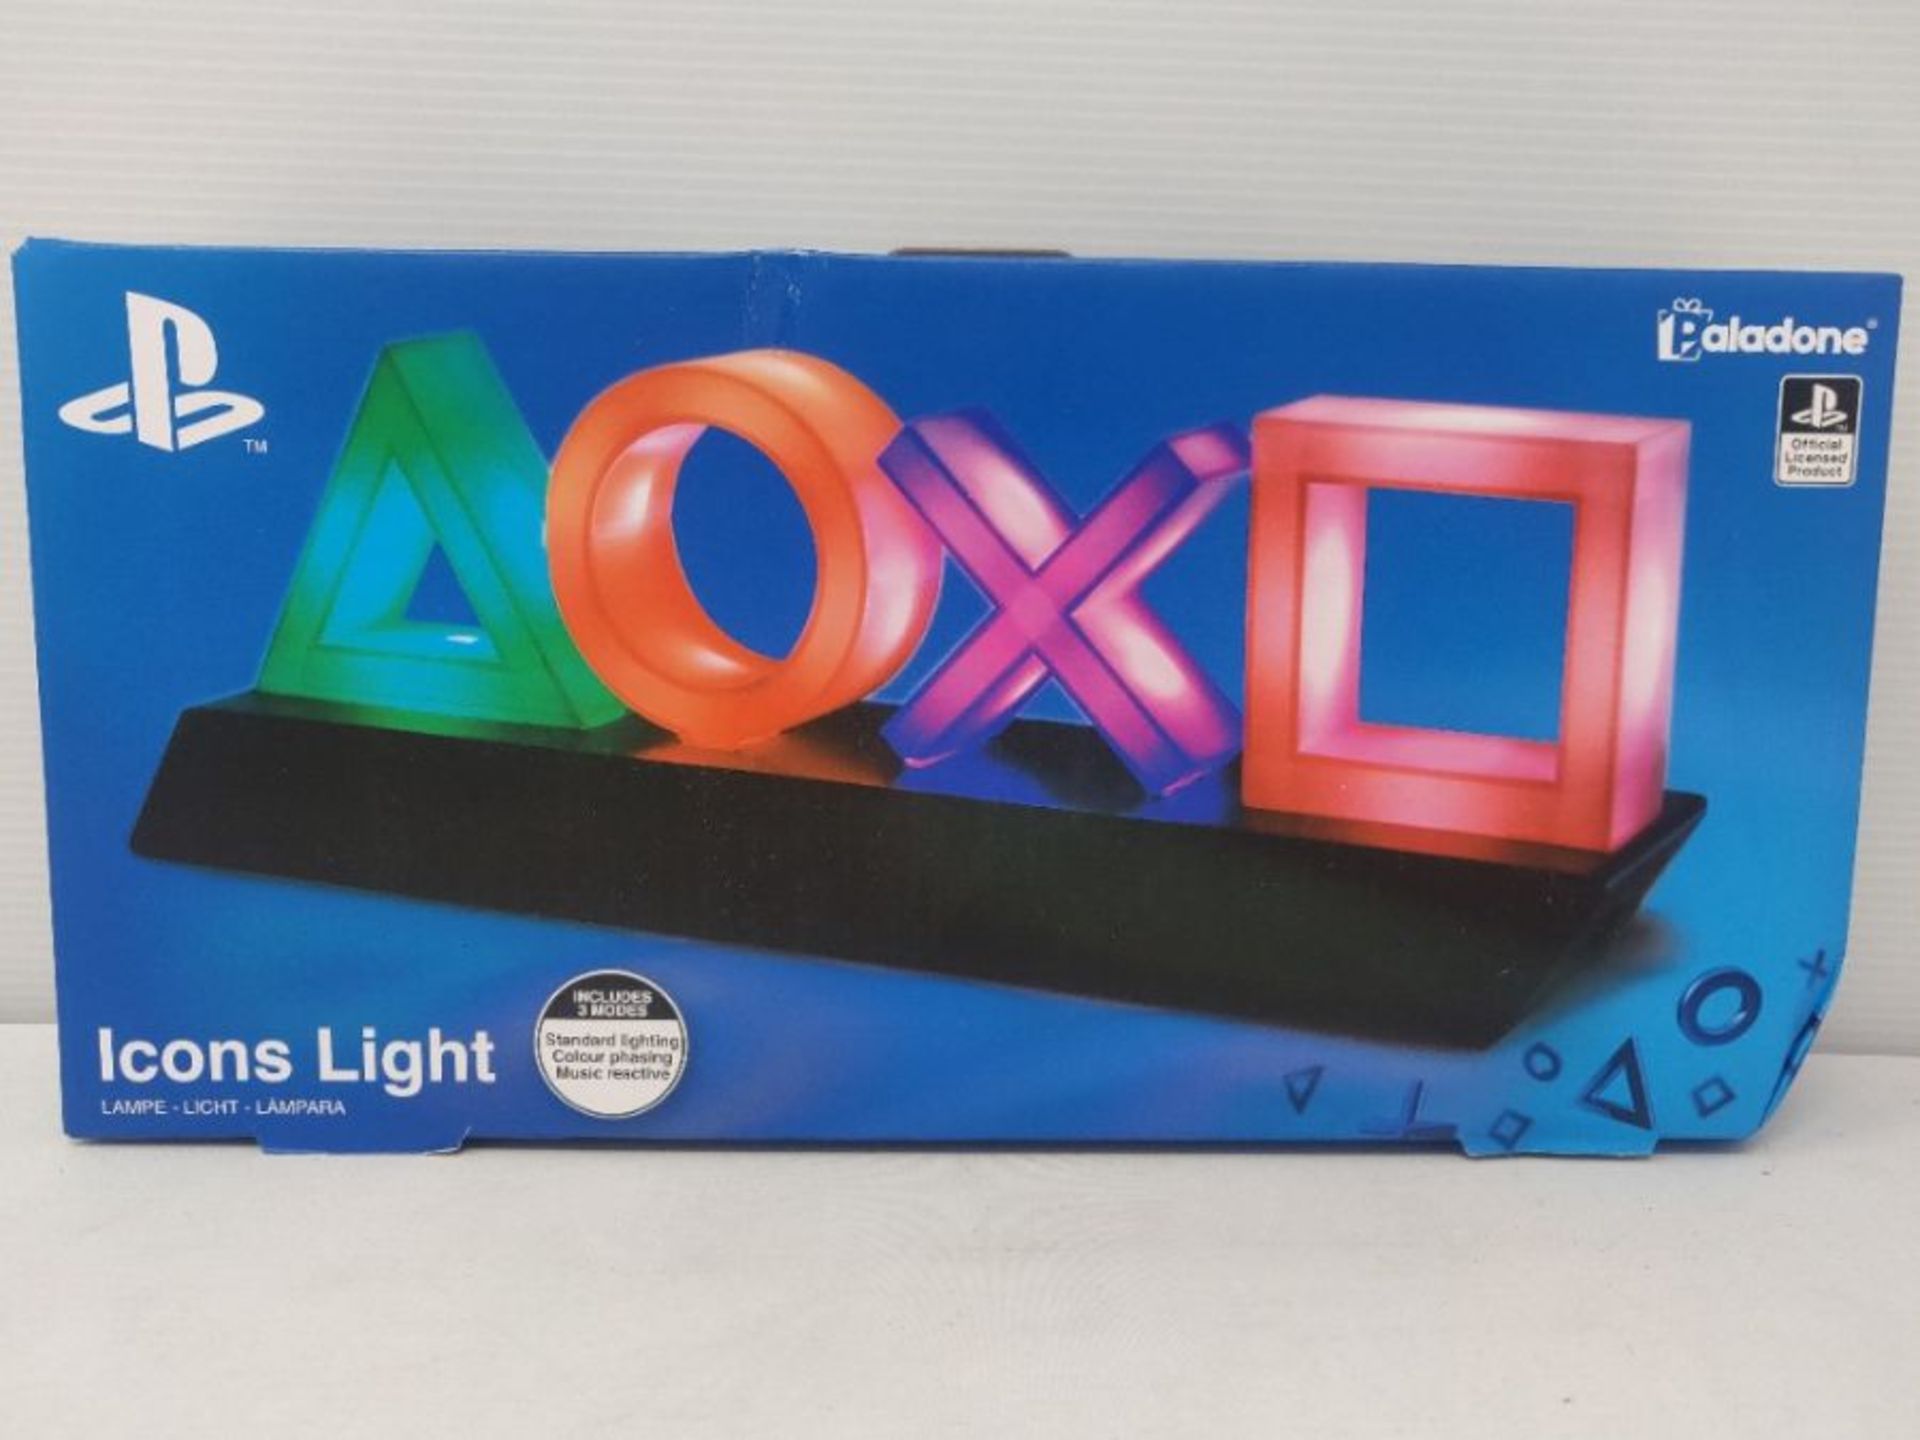 Paladone PP4140PS Playstation Icons 3 Light Modes Music Reactive Game Room, Multi Colo - Image 2 of 3